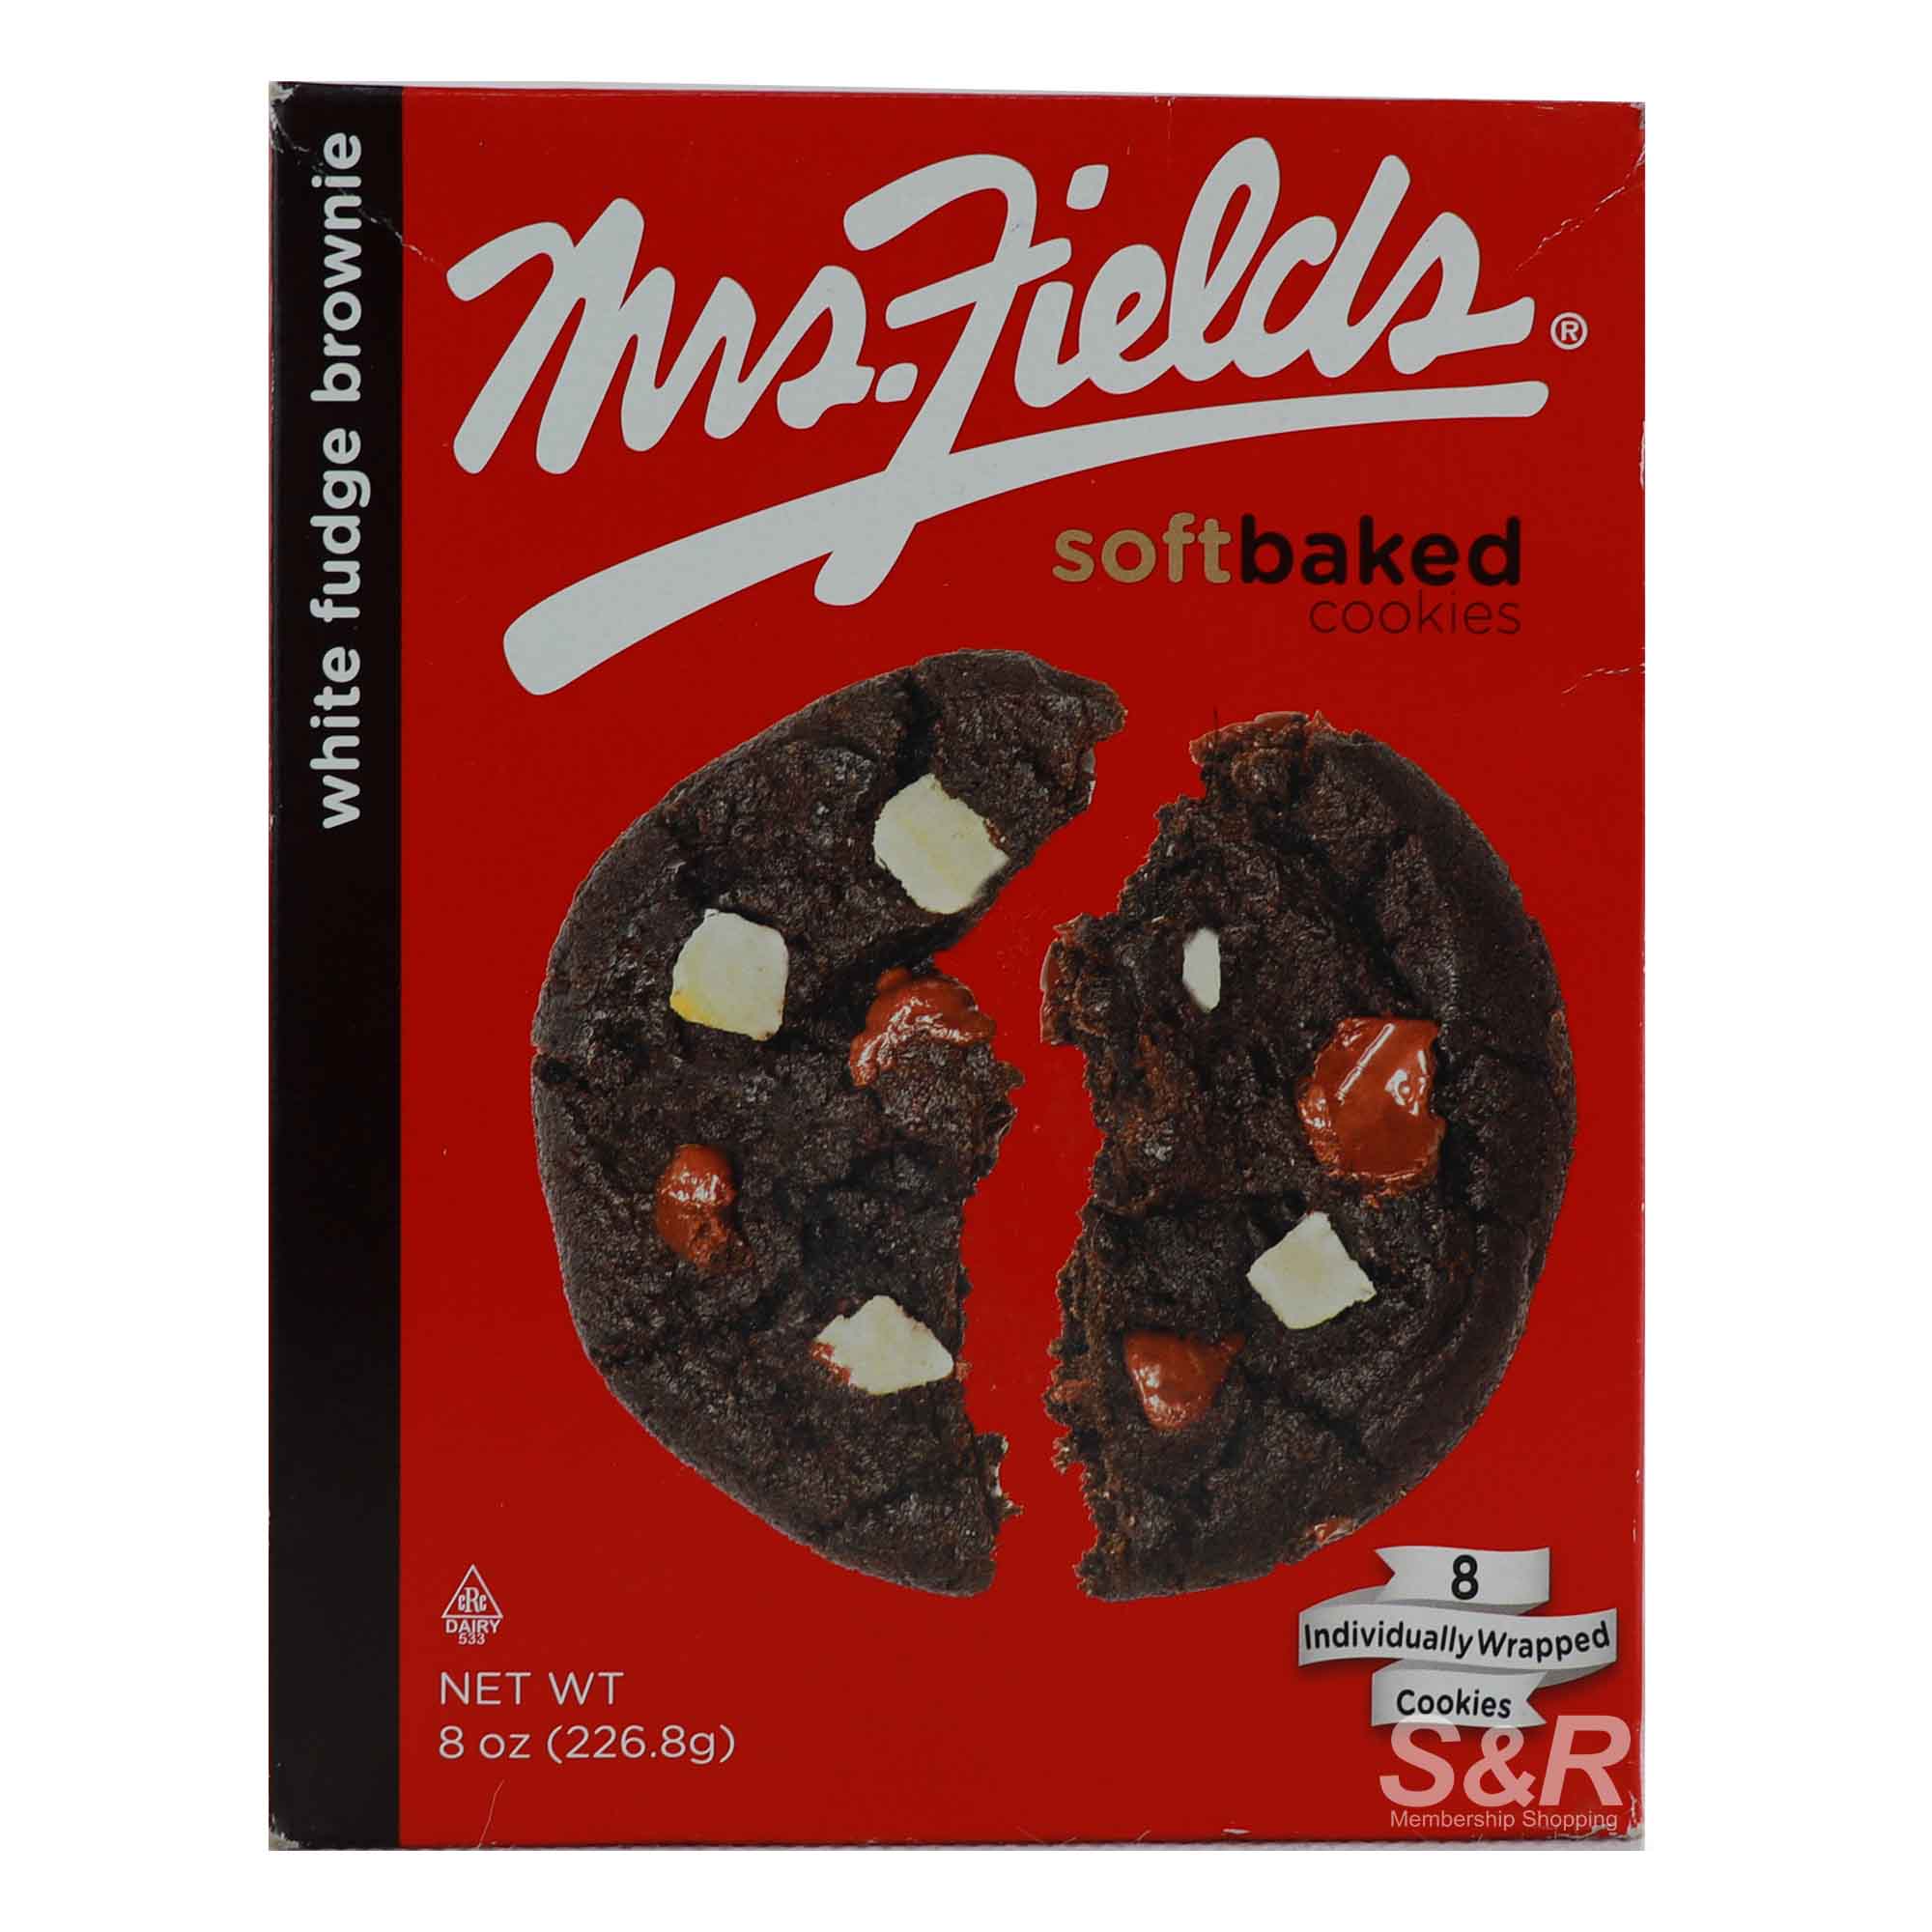 Mrs. Fields White Fudge Brownie Soft Baked Cookies 8pcs